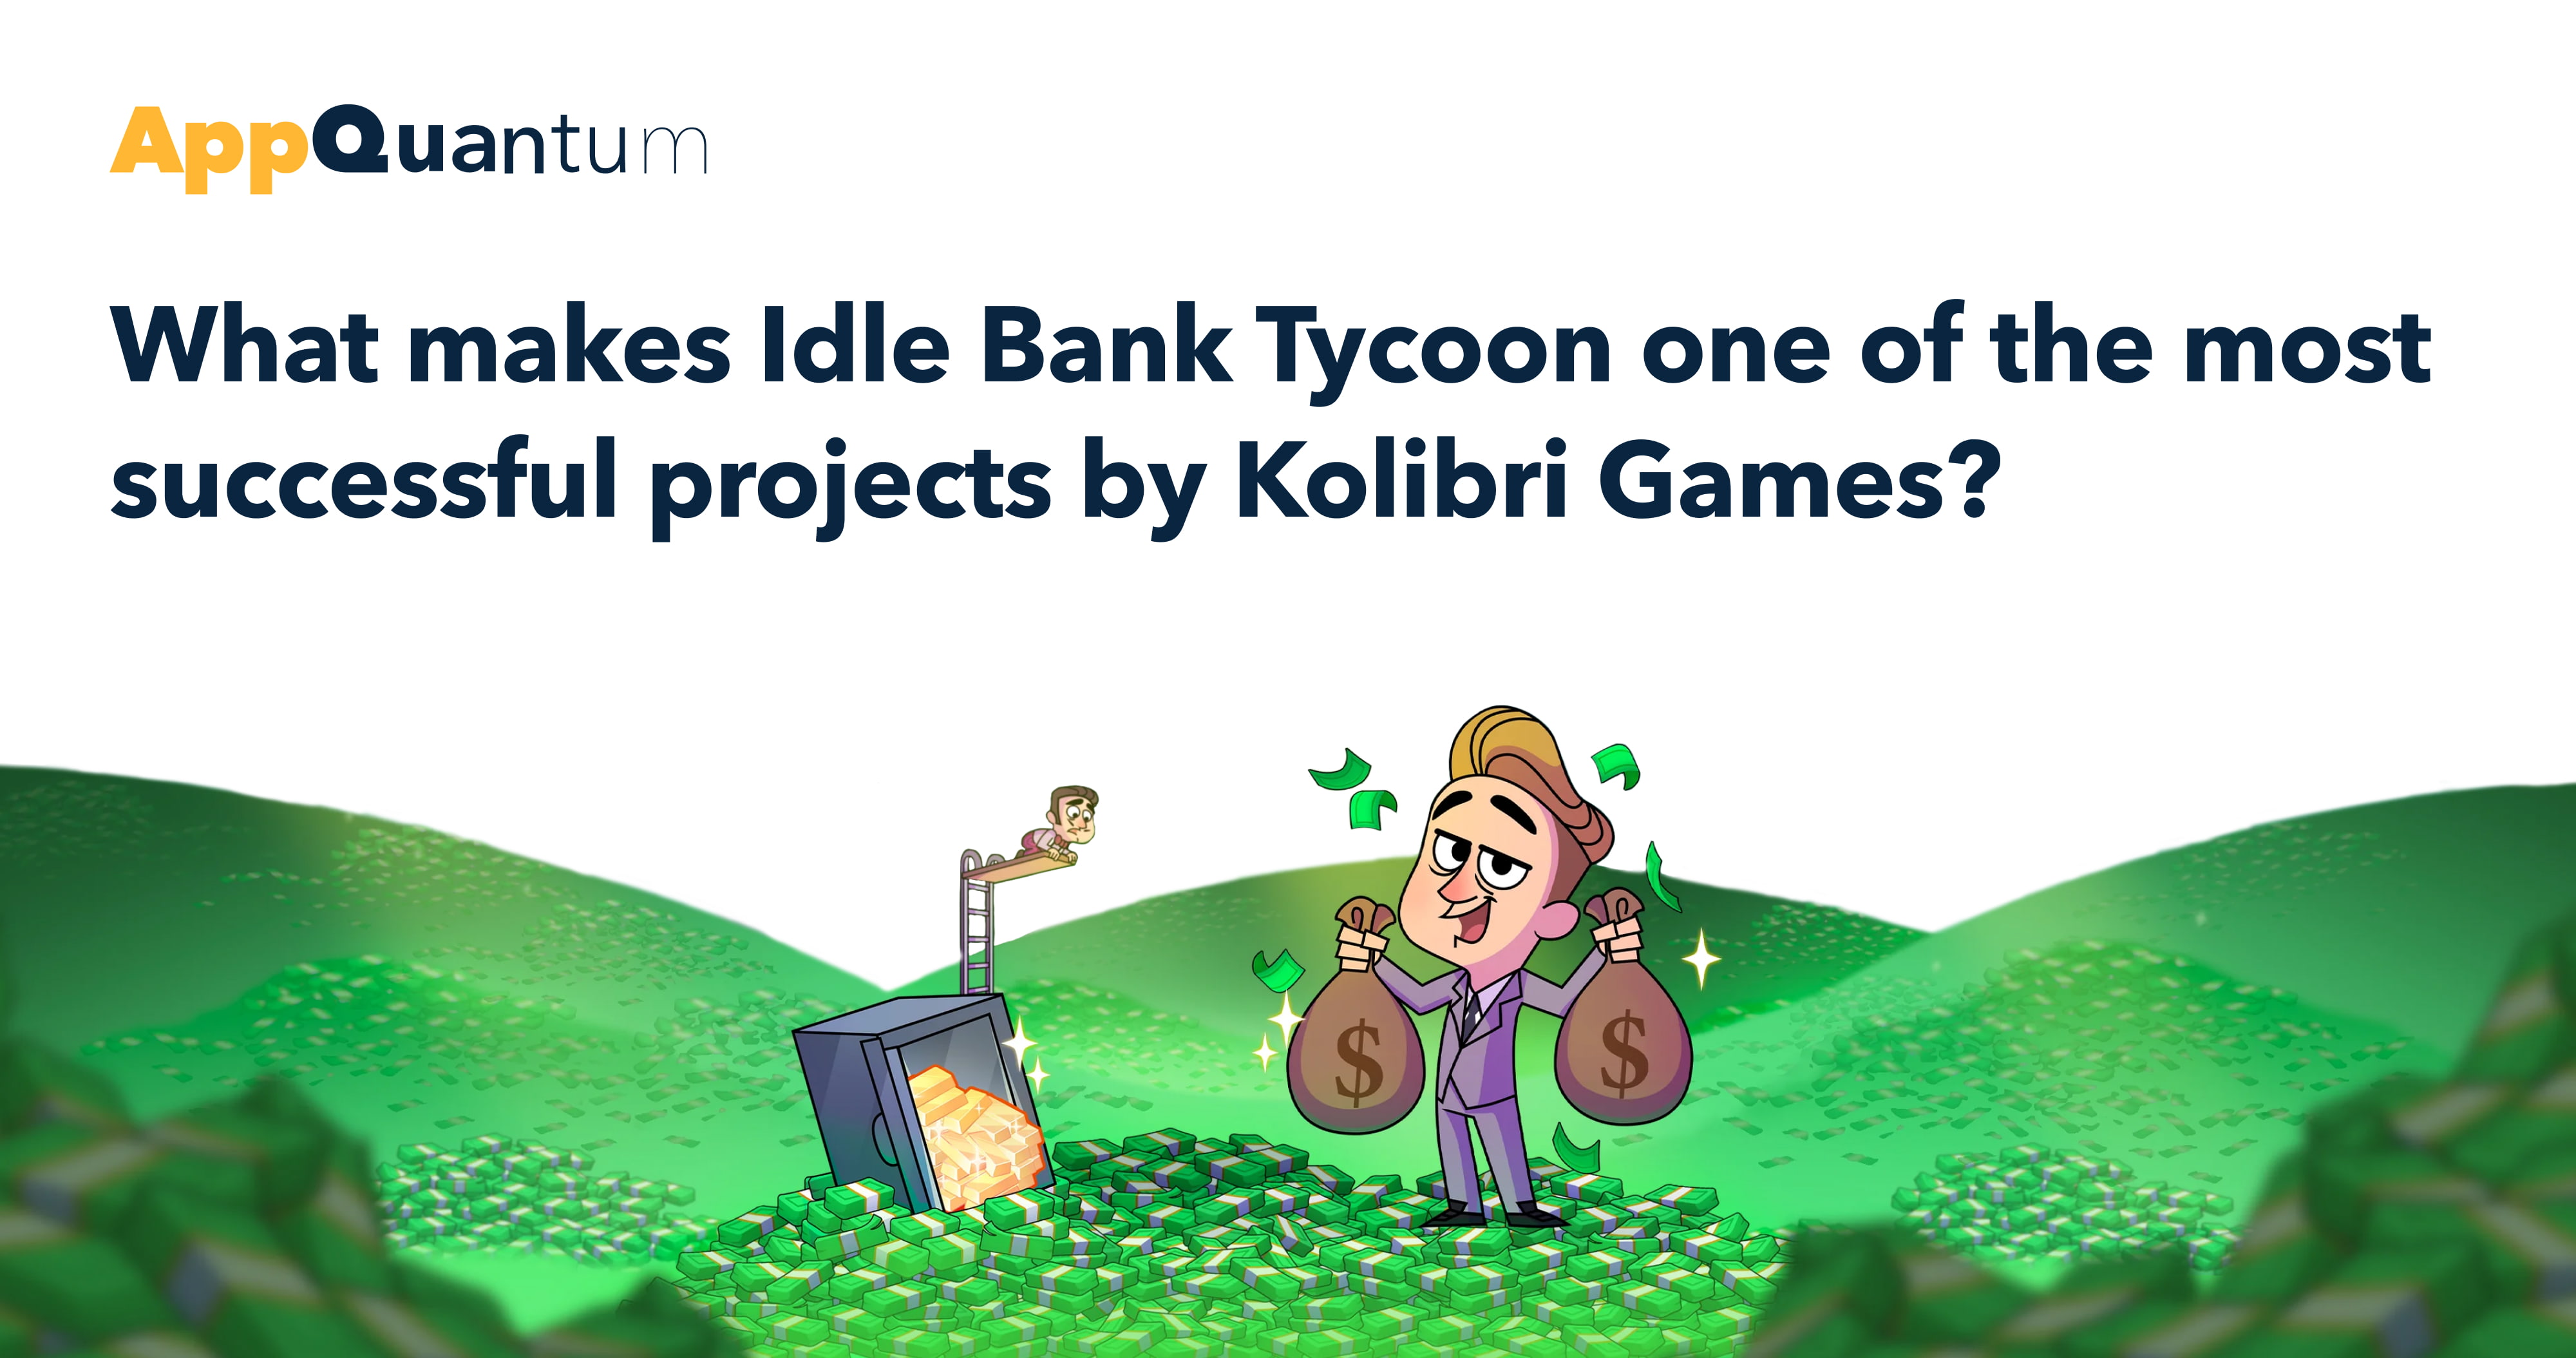 AppQuantum Deconstructs Idle Bank Tycoon: What Makes This Game One of the Most Successful Projects by Kolibri Games